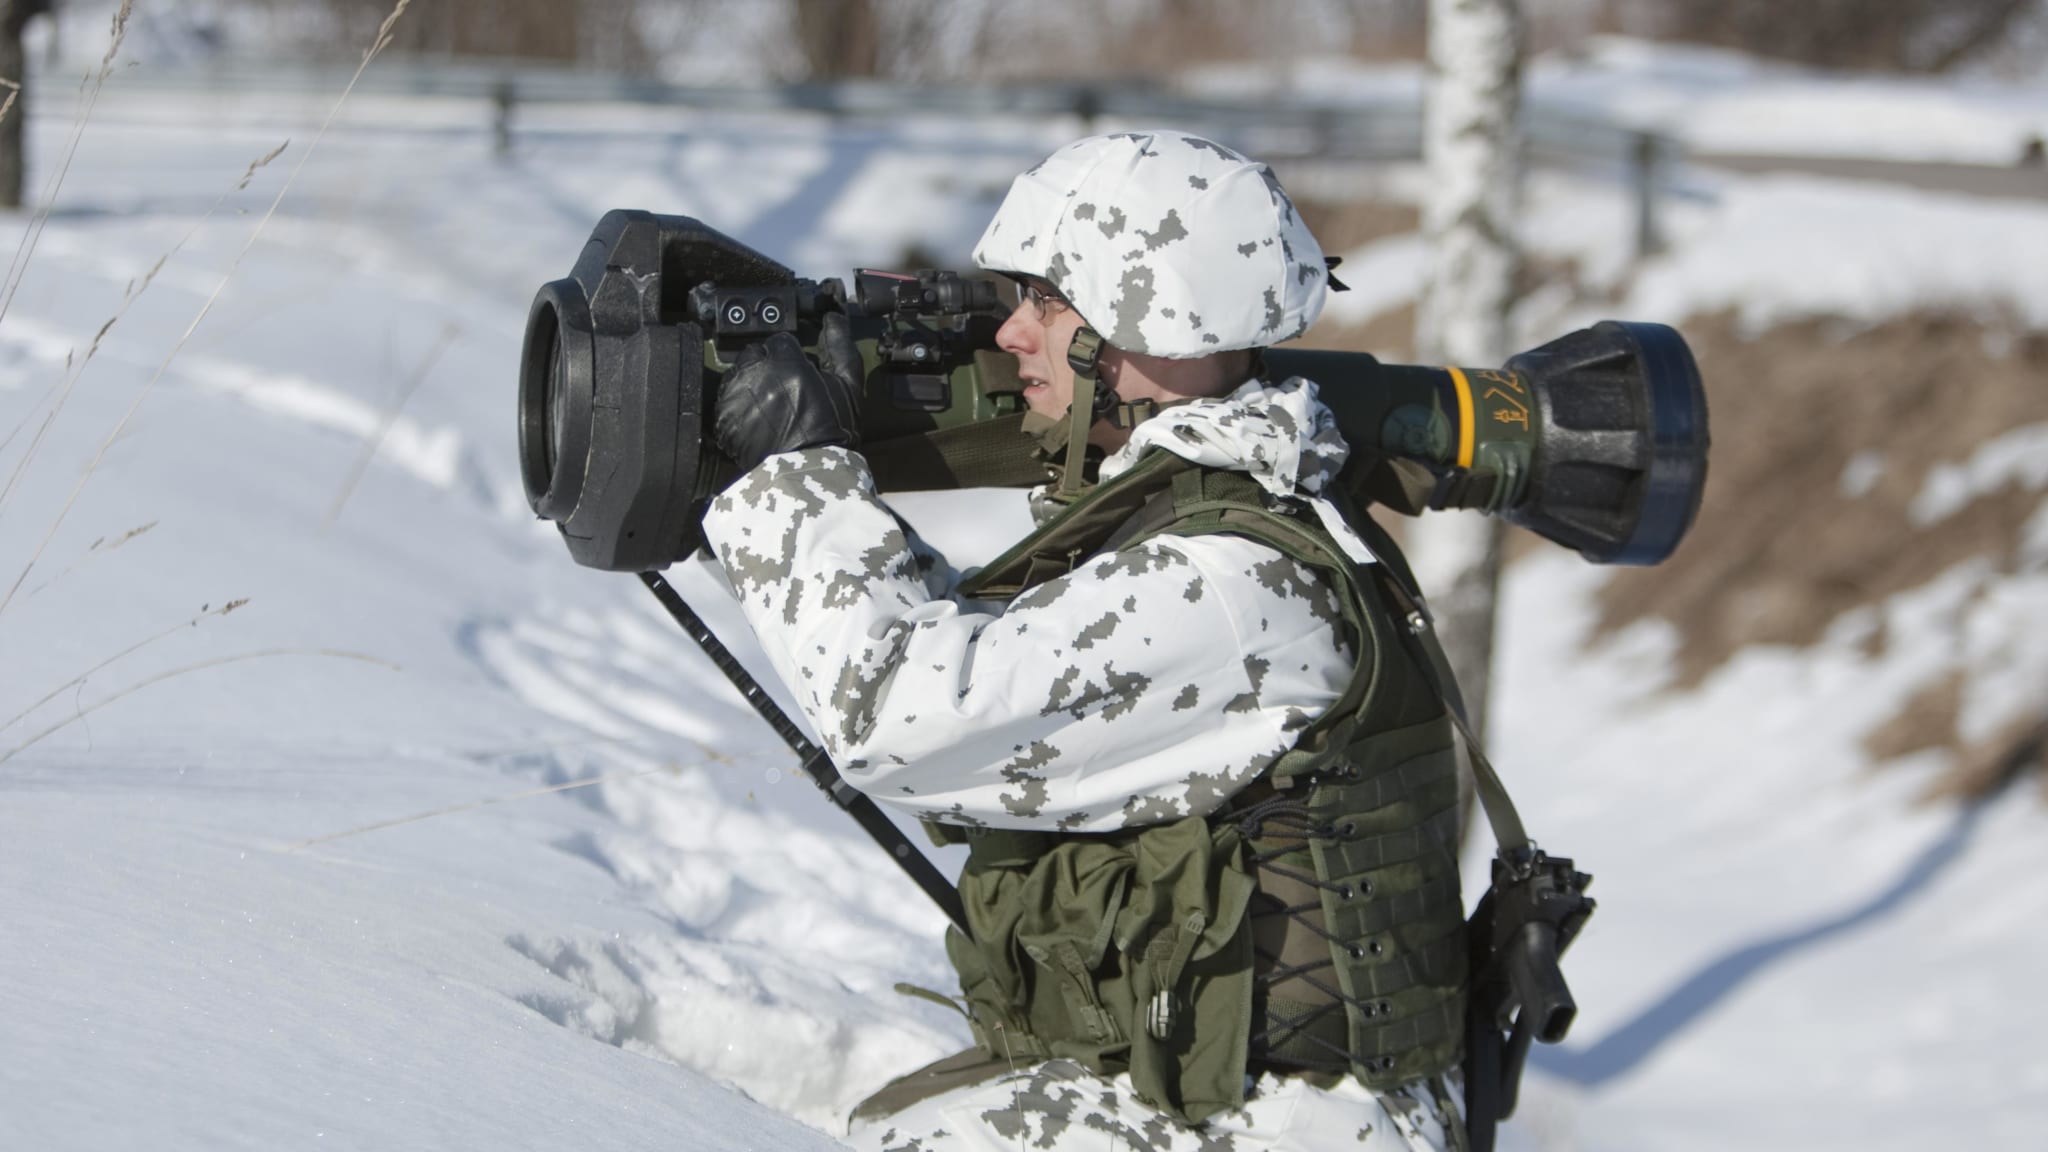 €40,000,000 contract: Finland orders NLAW anti-tank missile systems from Saab